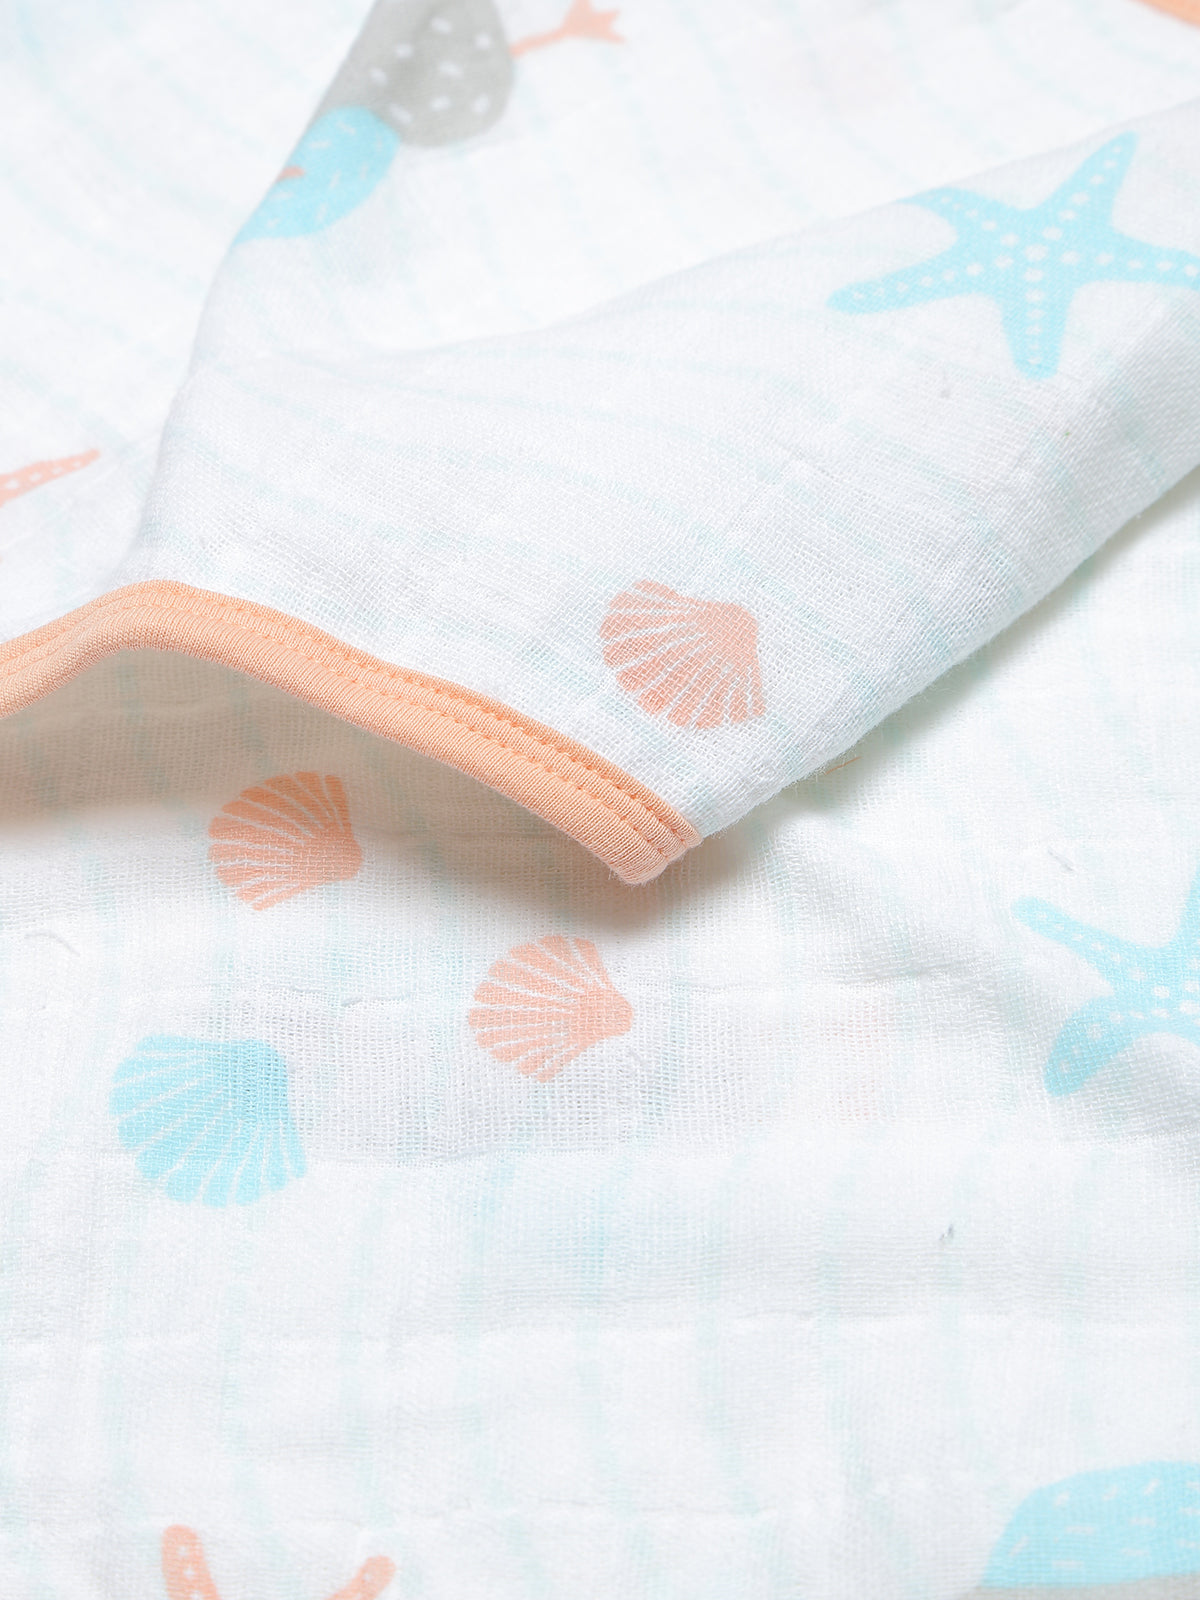 Newborn Care Gift Set from Ooka Baby (An Ocean's Lullaby Collection)- Available in 3 Prints